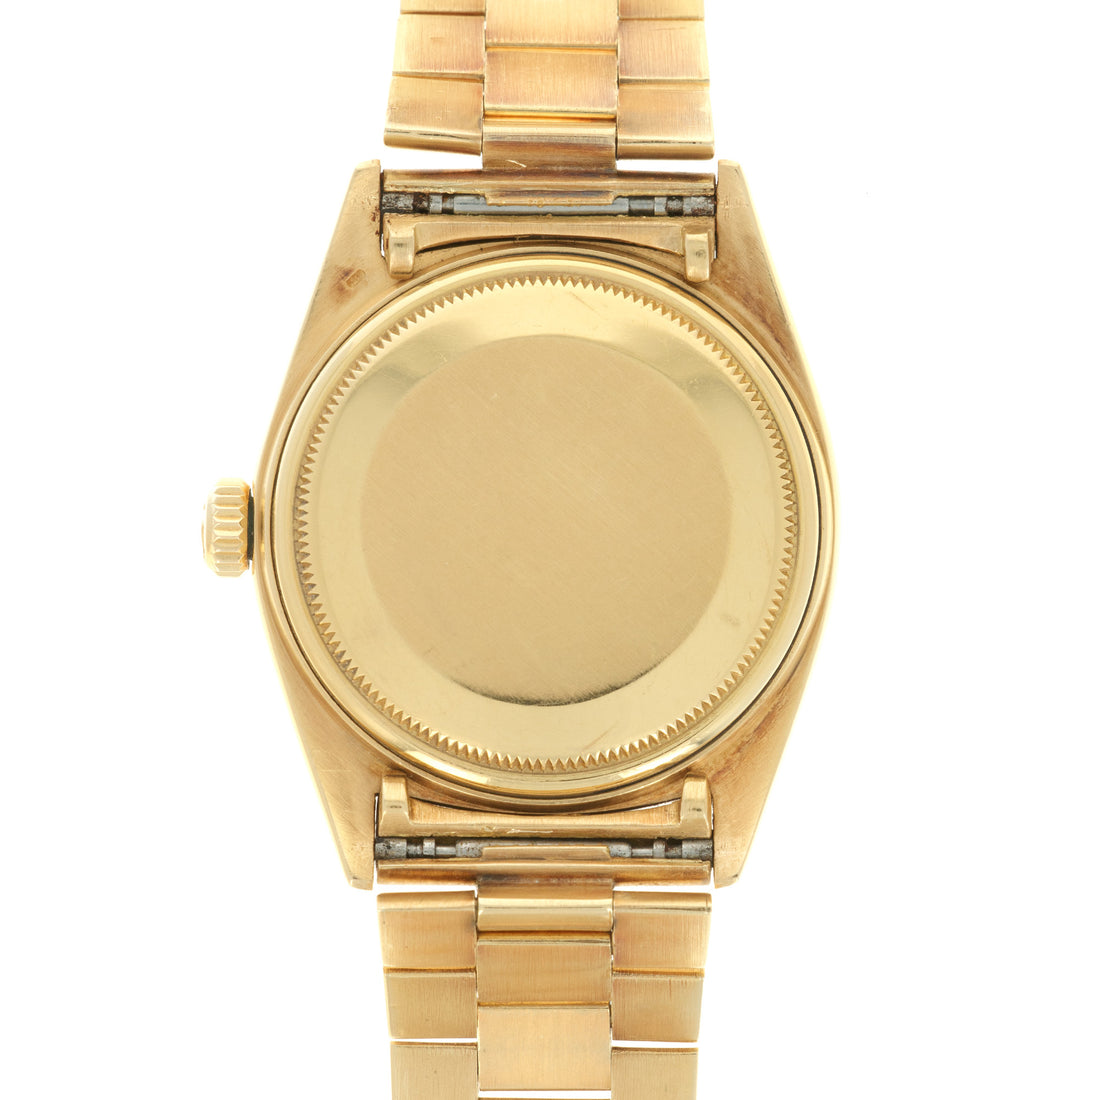 Rolex Yellow Gold Datejust Watch Ref. 1601, from 1967